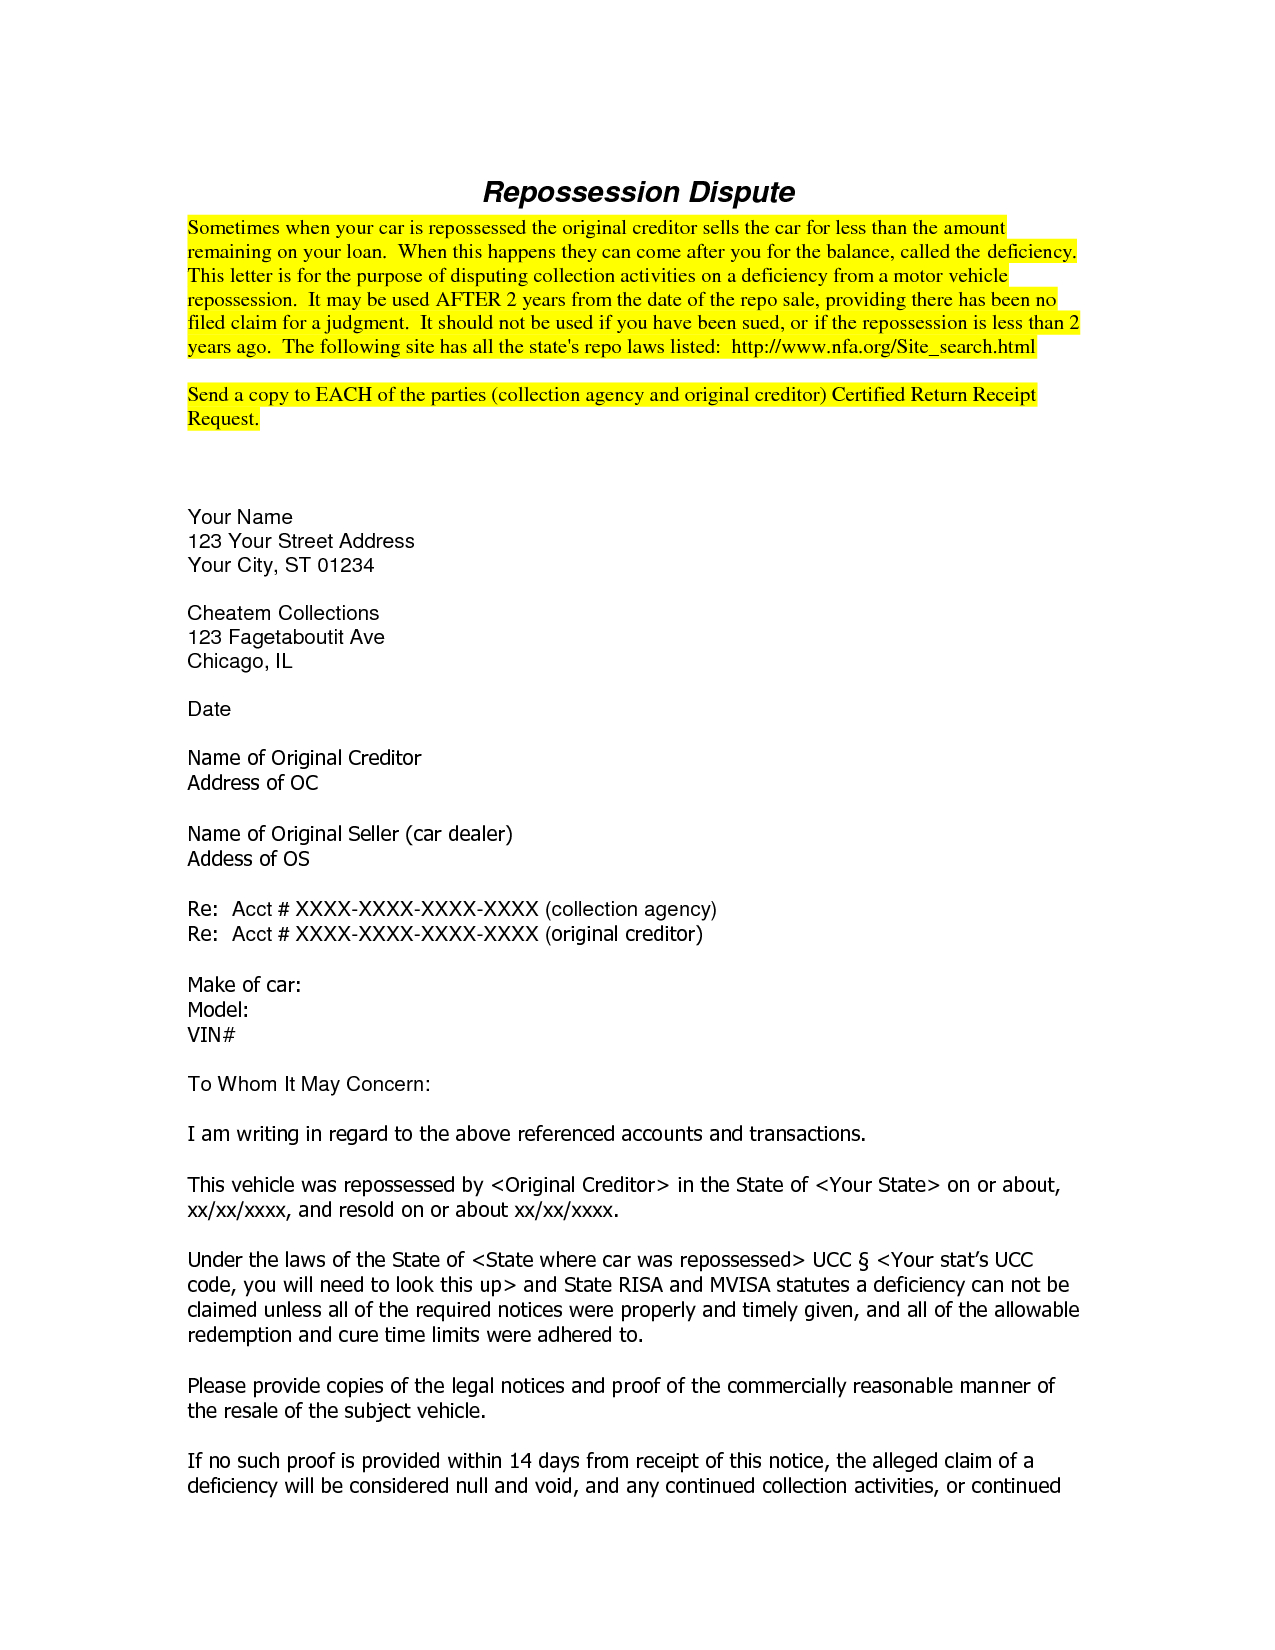 car-repossession-letter-template-collection-letter-template-collection